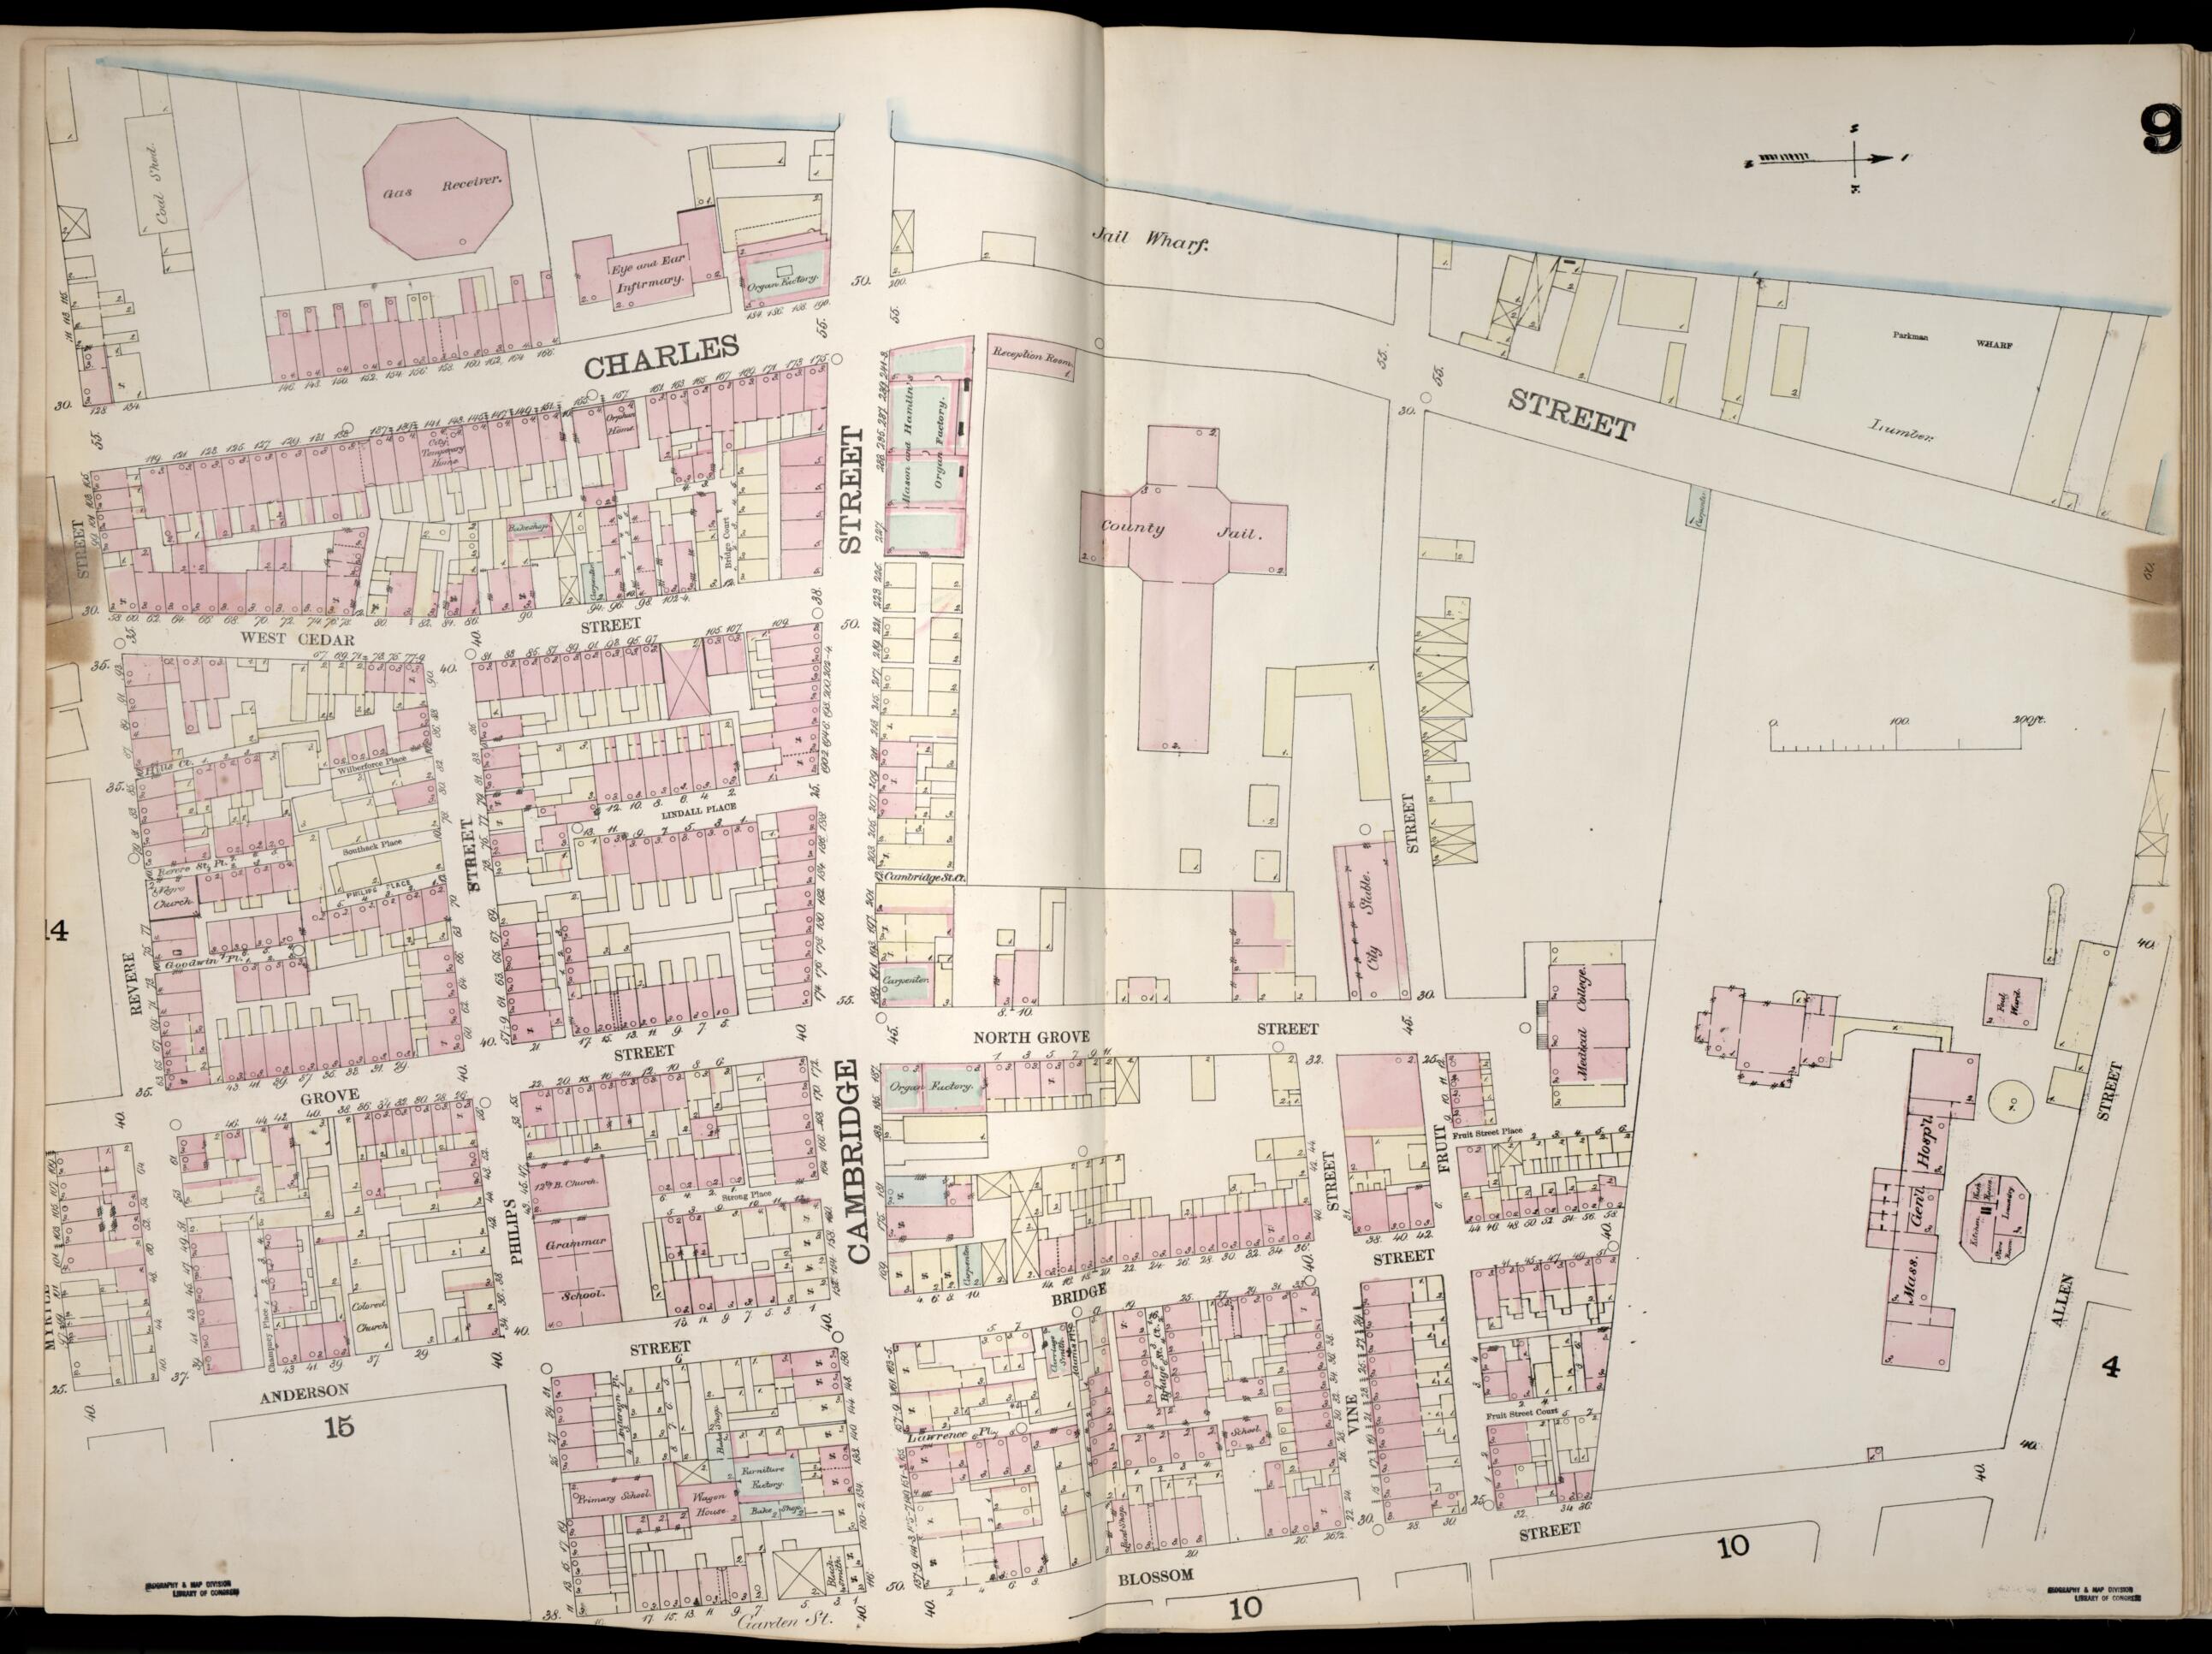 This old map of Image 10 of Boston from Insurance Map of Boston. Volume 1 from 1867 was created by D. A. (Daniel Alfred) Sanborn in 1867